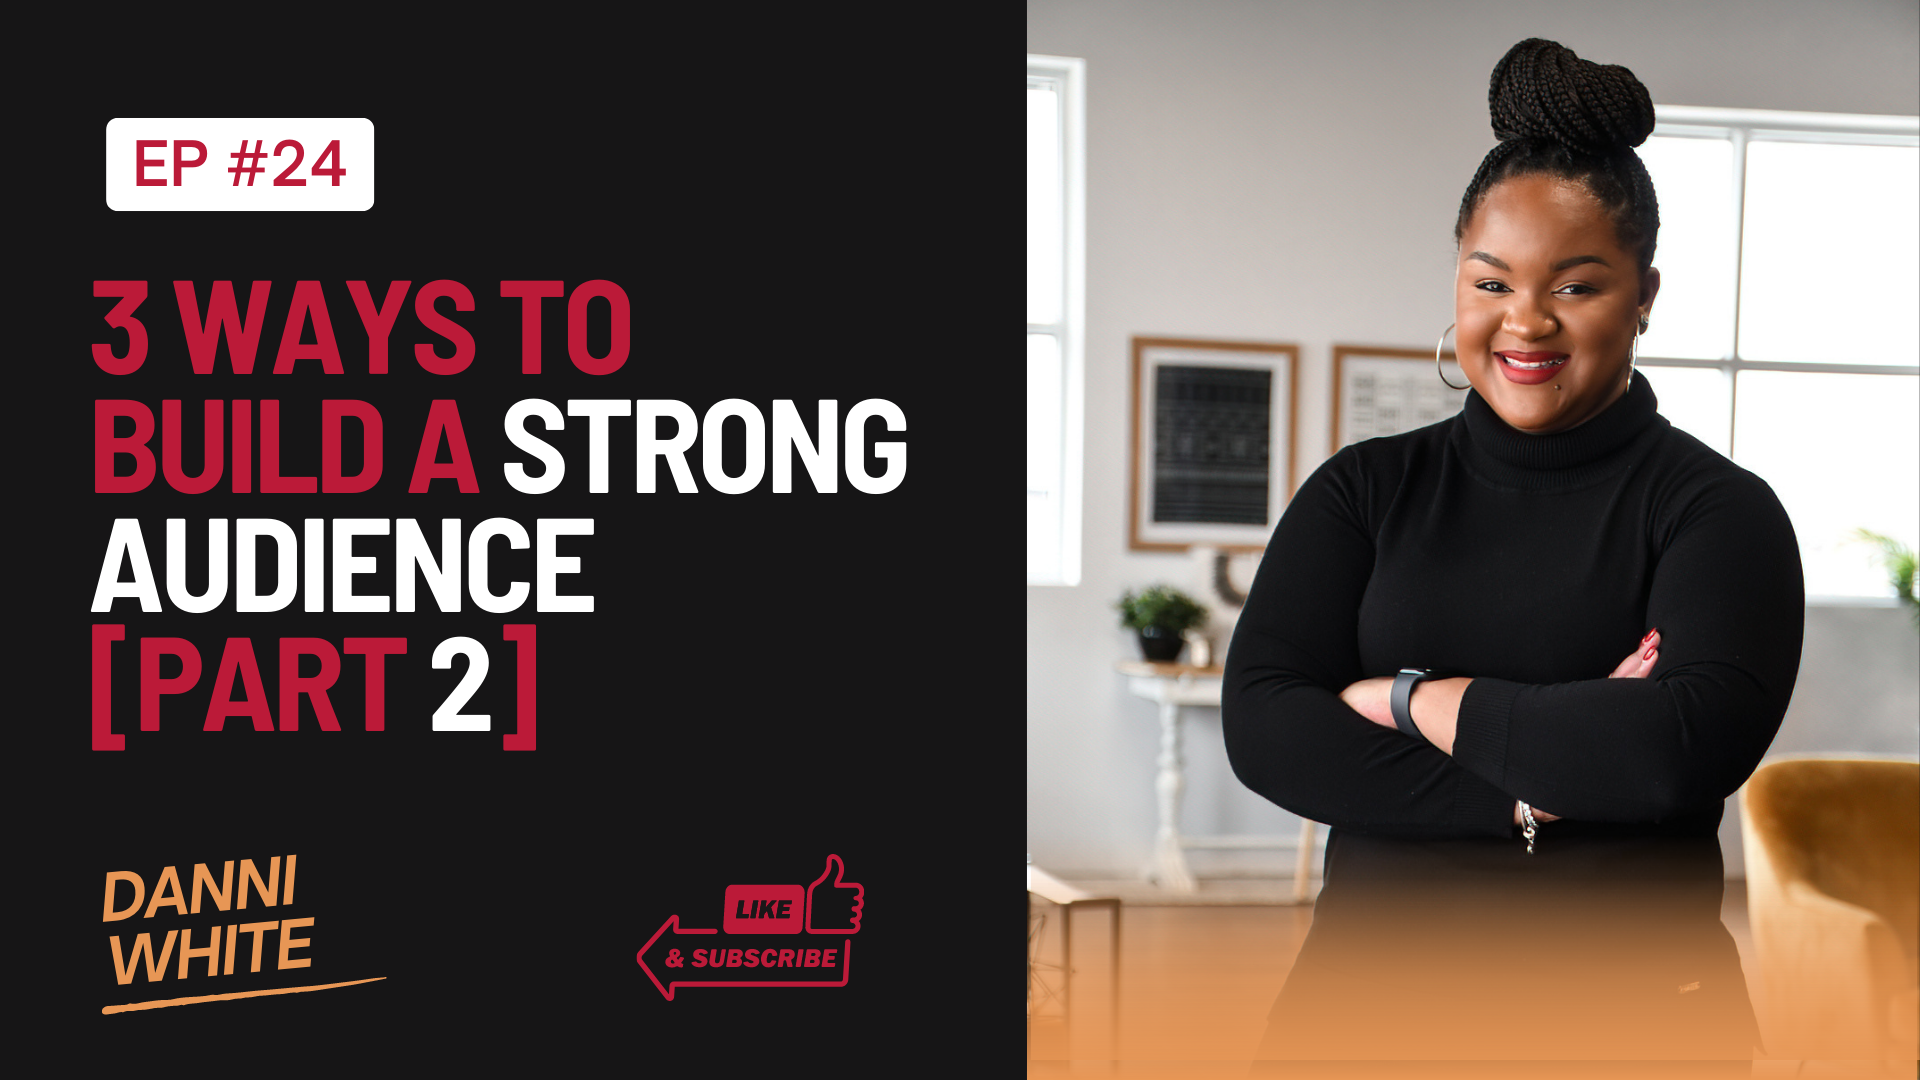 Episode 24: 3 Ways to Build a Strong Audience [Part 2]